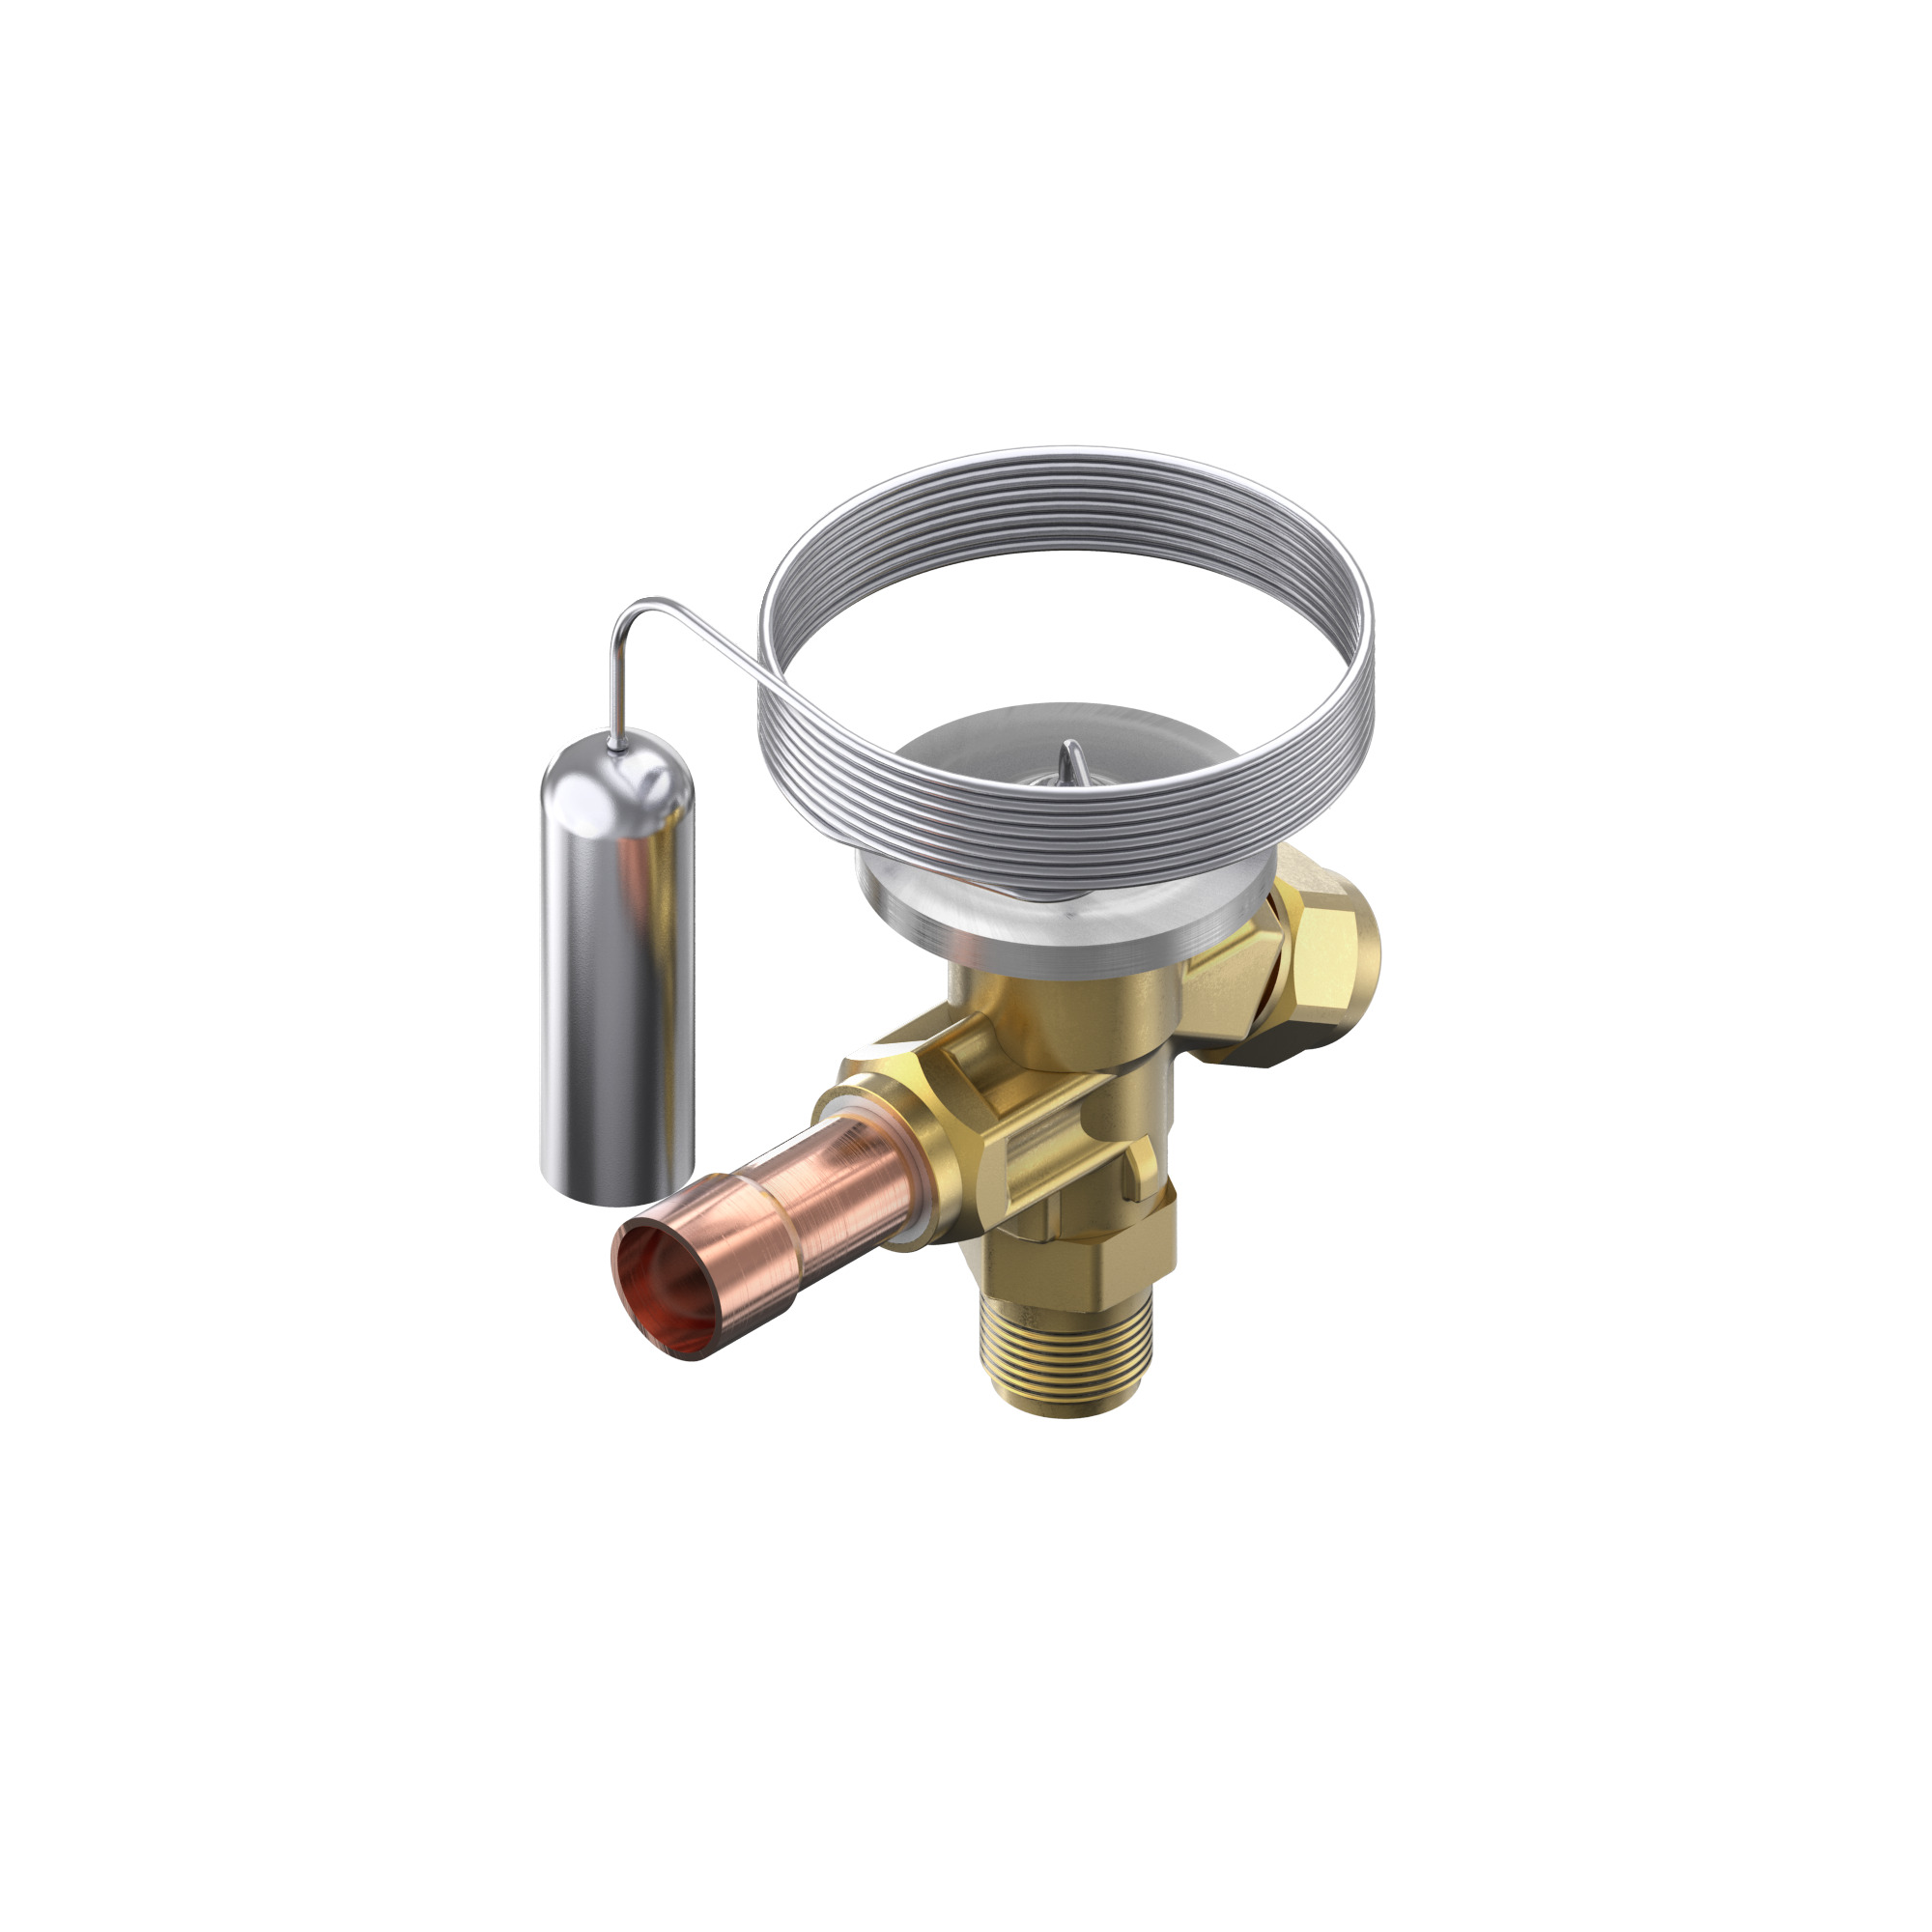 Thermostatic expansion valve, T 2, R452A